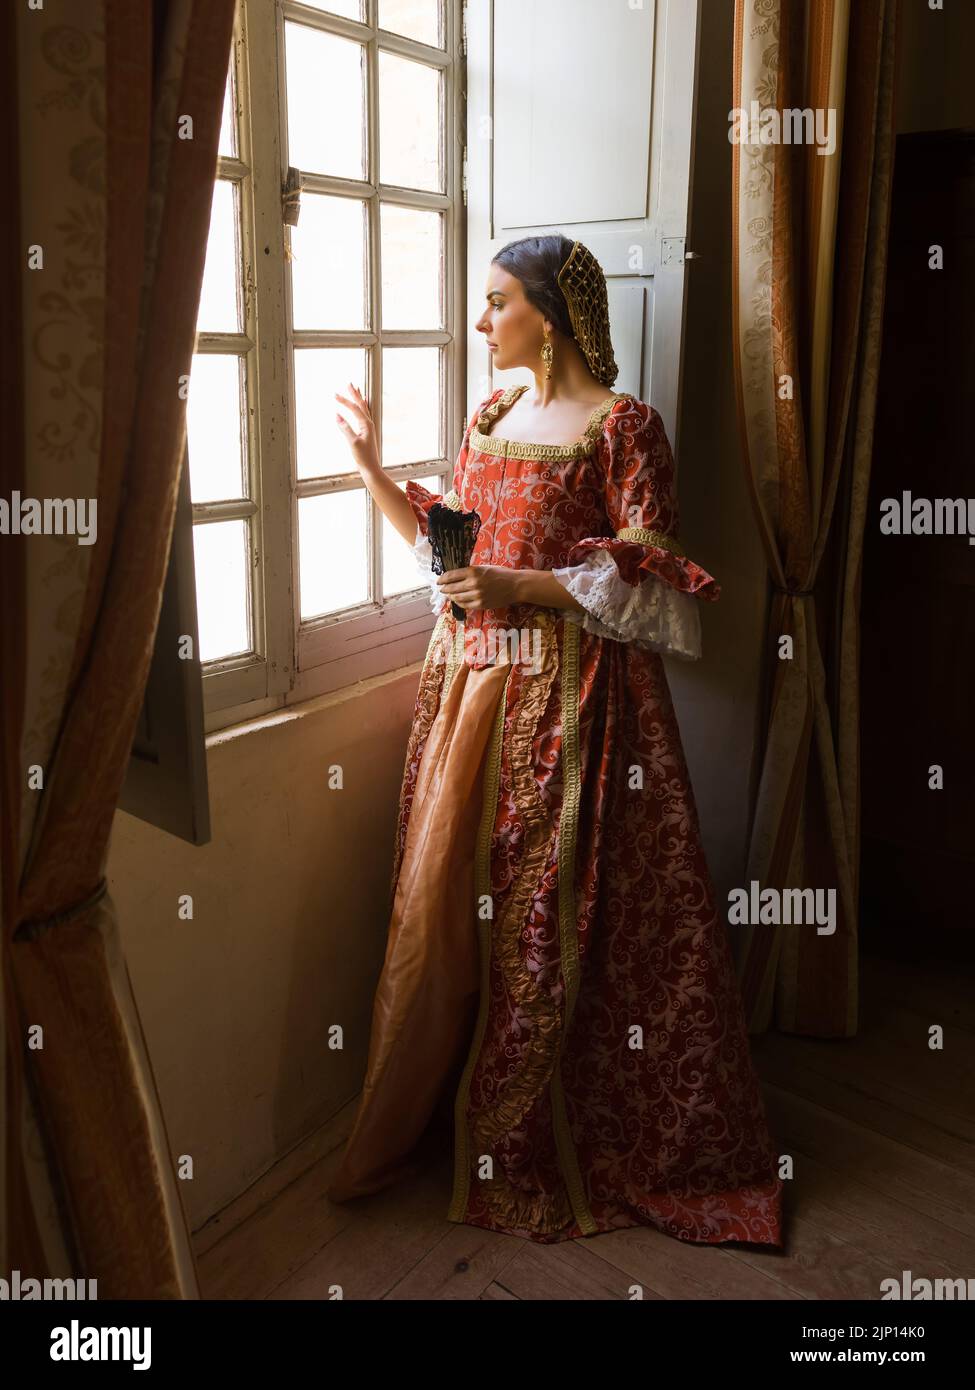 Woman wearing authentic Renaissance costome and headdress standing at her window in a medieval castle Stock Photo